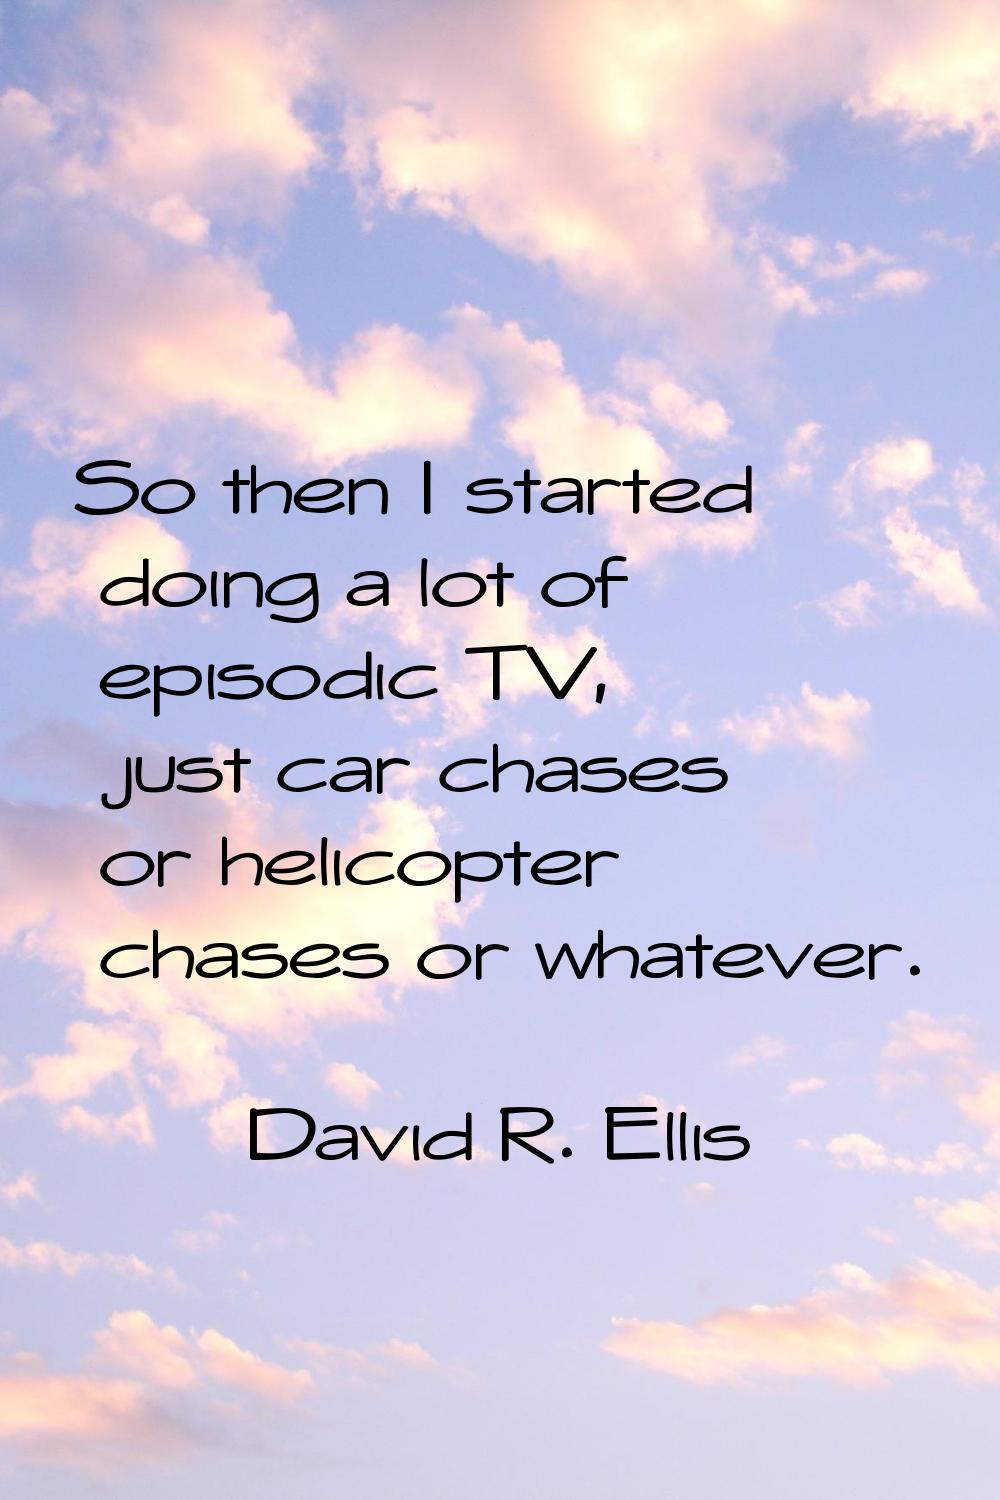 So then I started doing a lot of episodic TV, just car chases or helicopter chases or whatever.